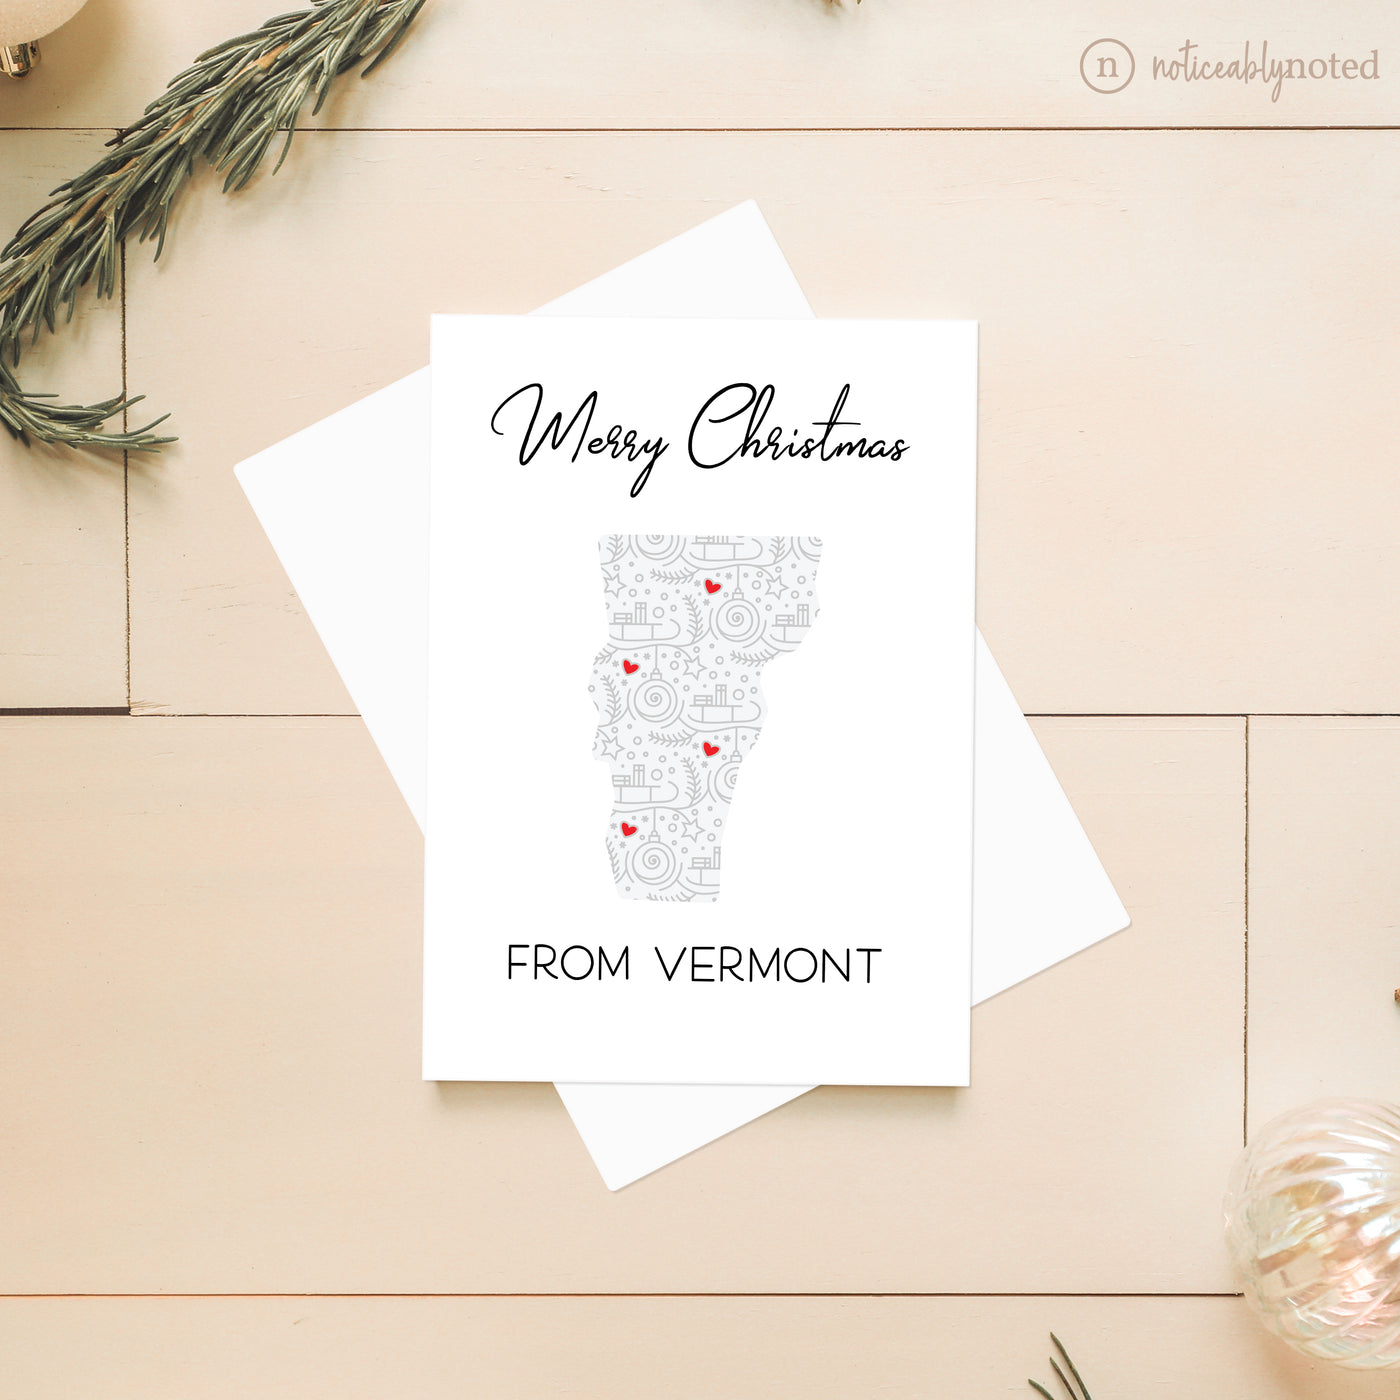 Vermont Christmas Card - Merry Christmas | Noticeably Noted